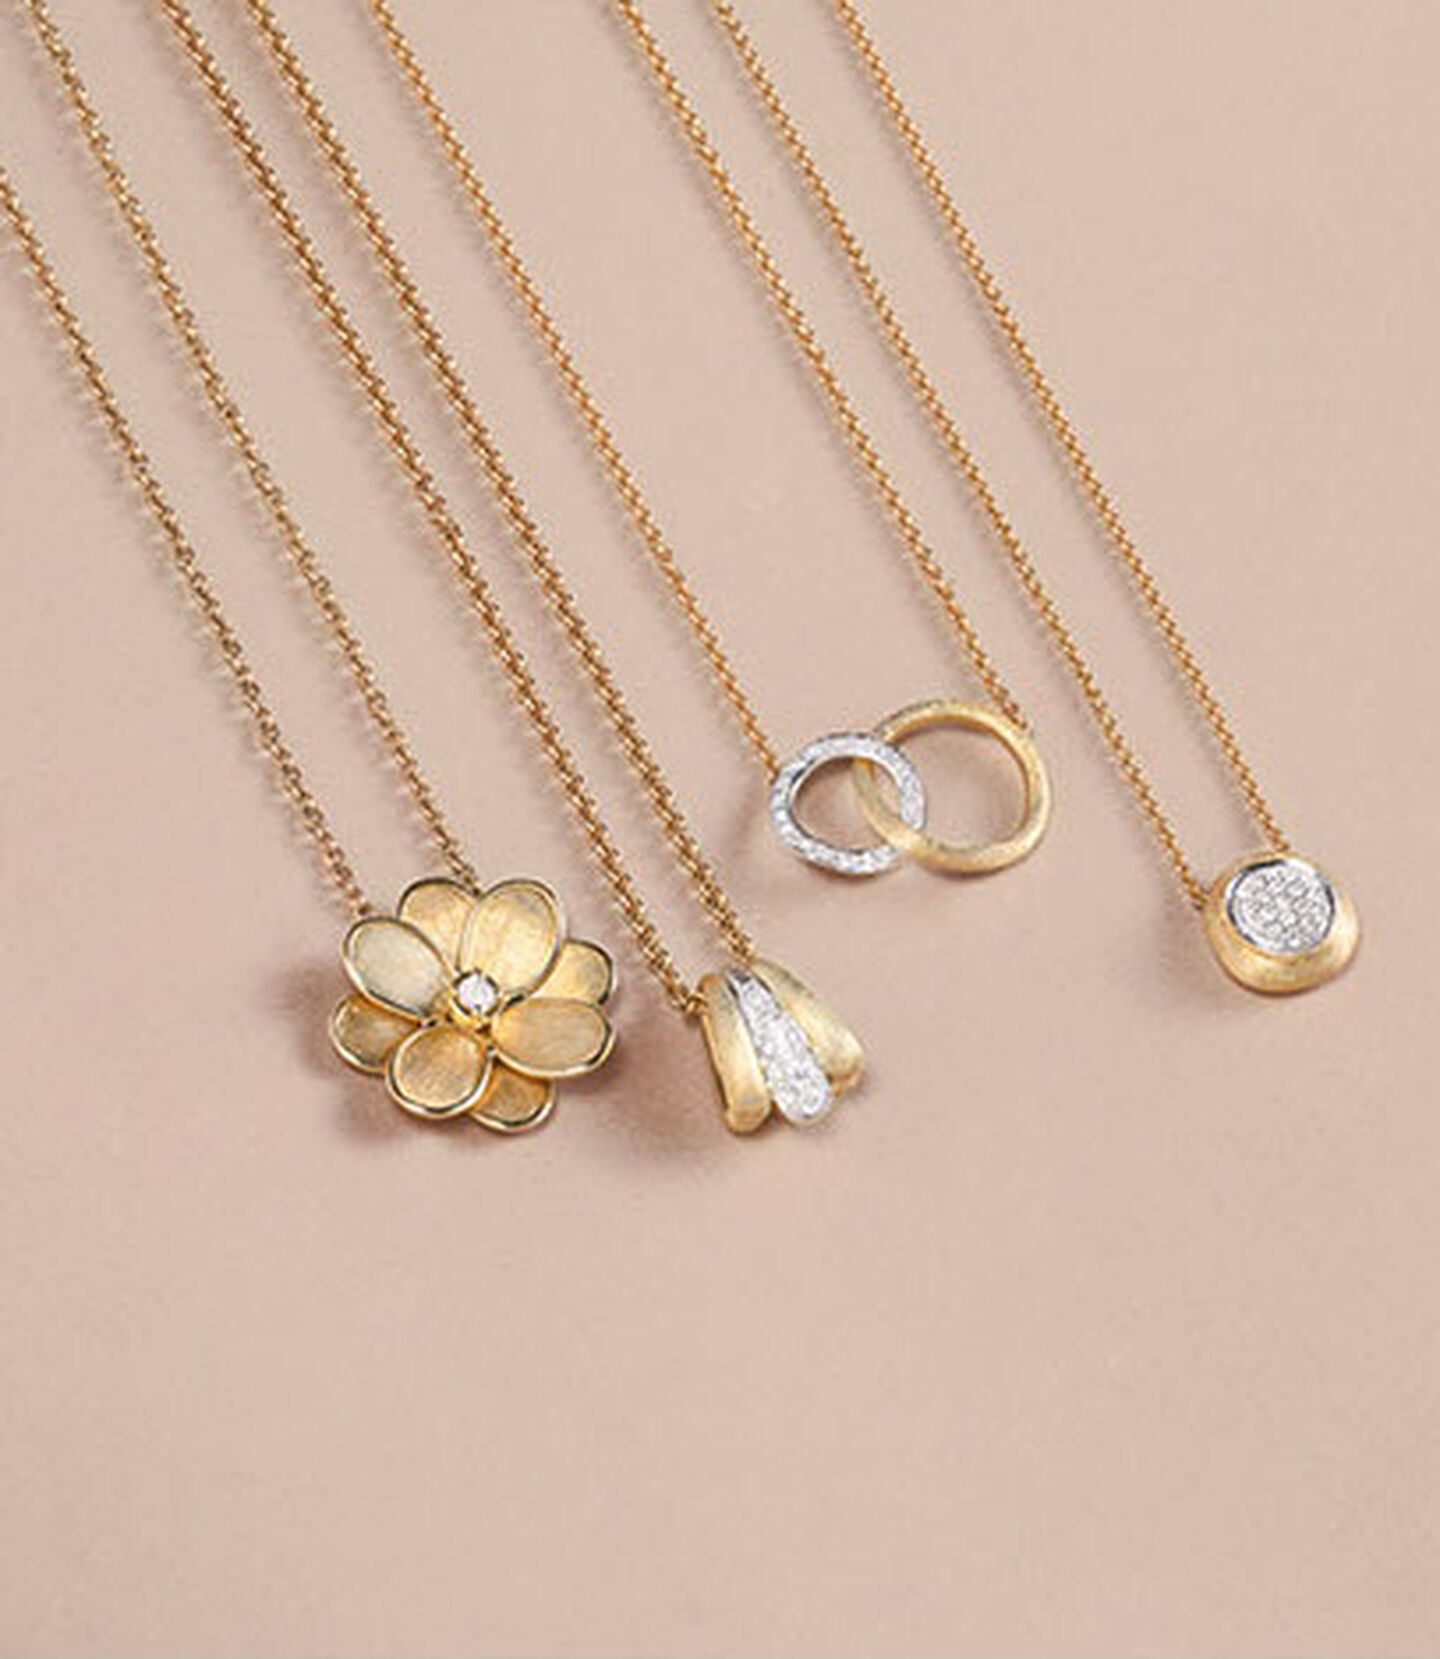 Four gold Marco Bicego necklaces